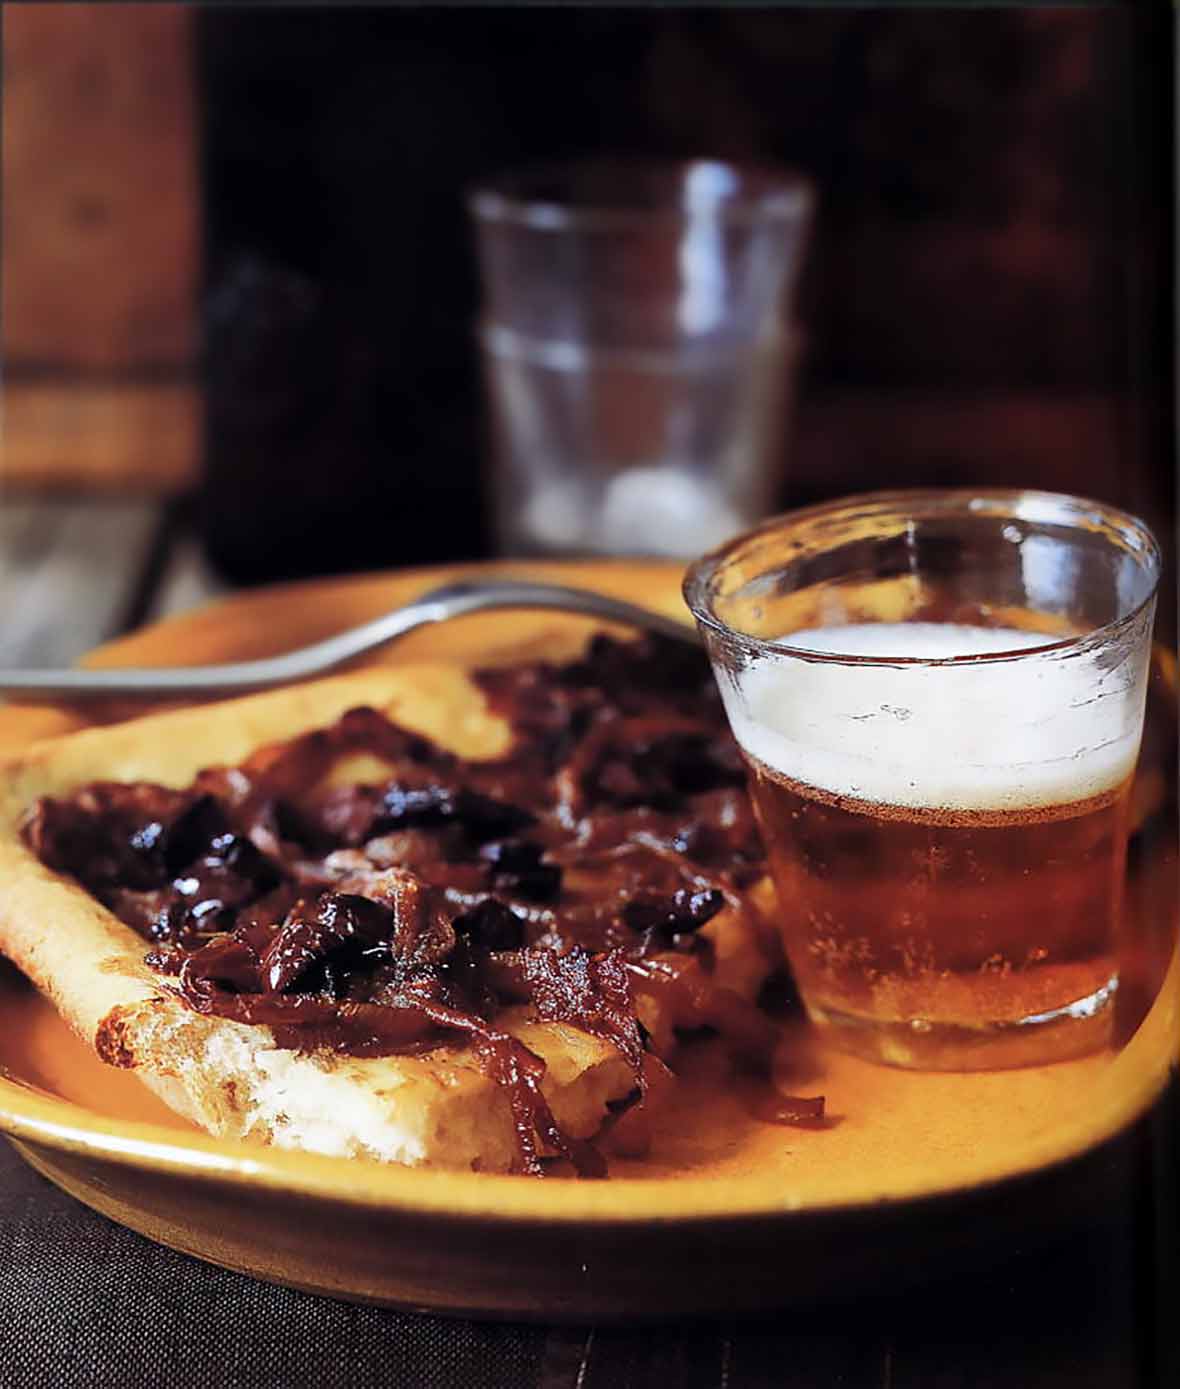 Pissaladière square on a plate with beer.